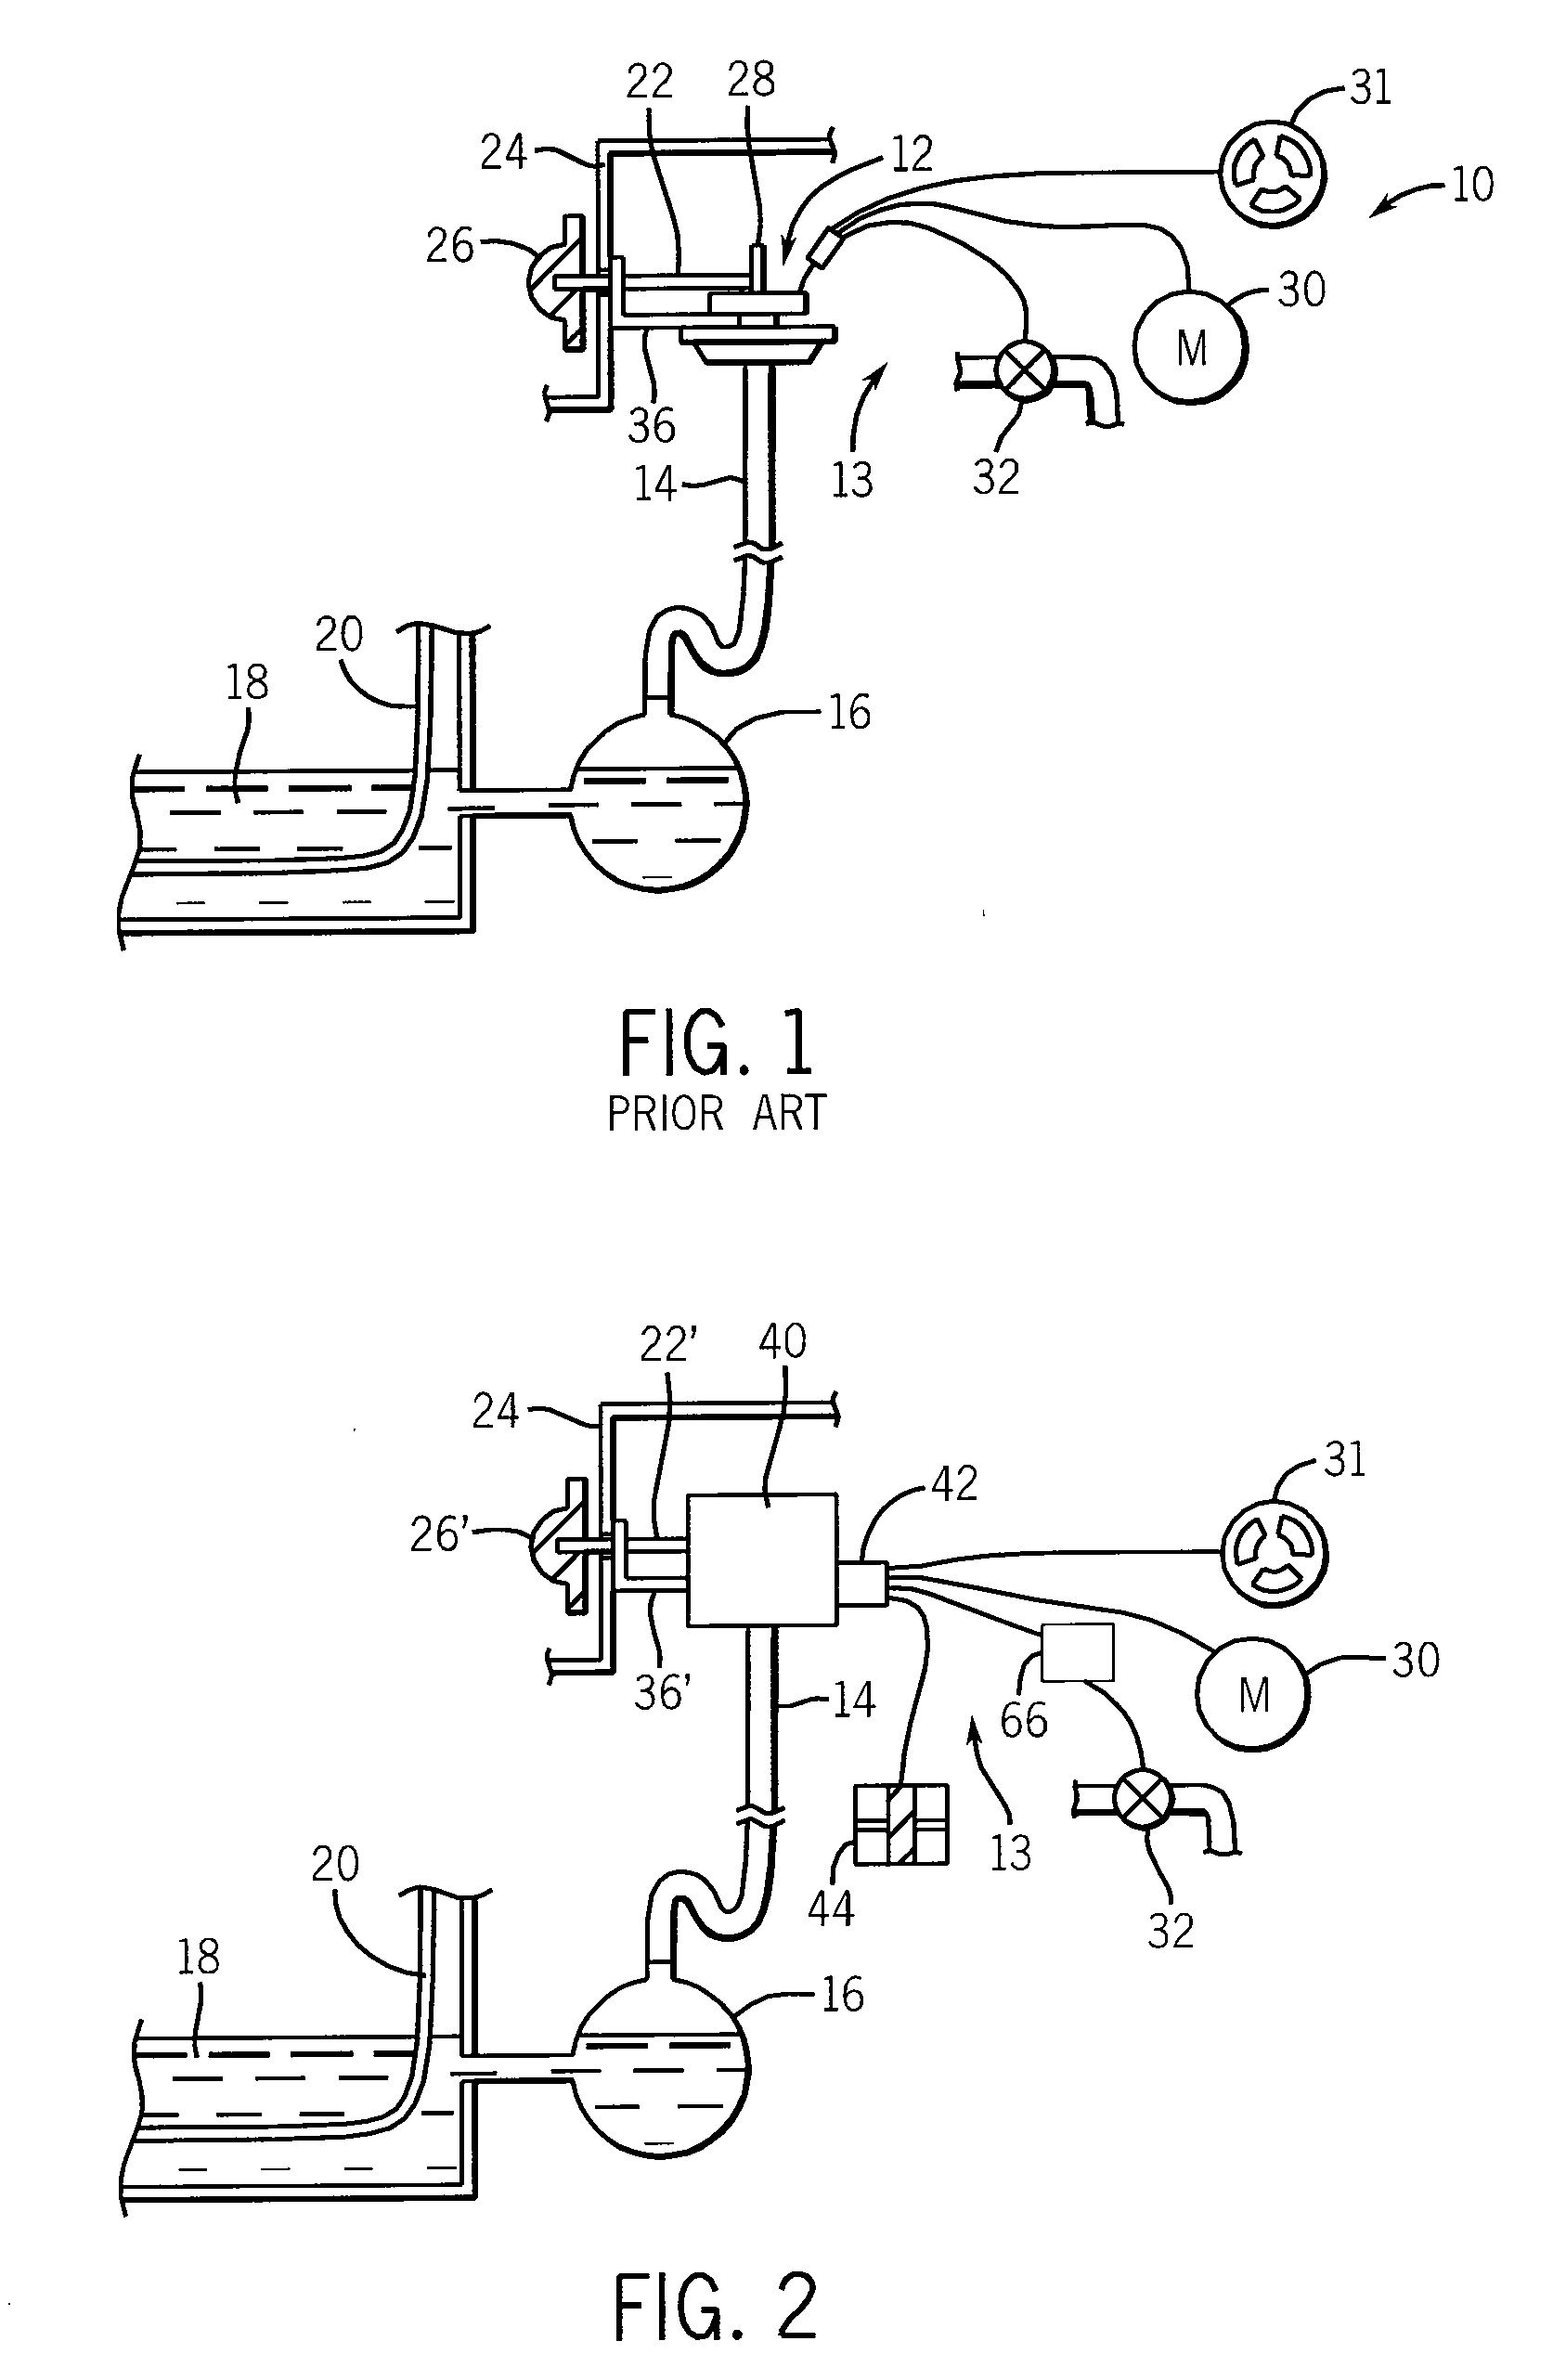 Method and apparatus for upgrading washing machine water efficiency